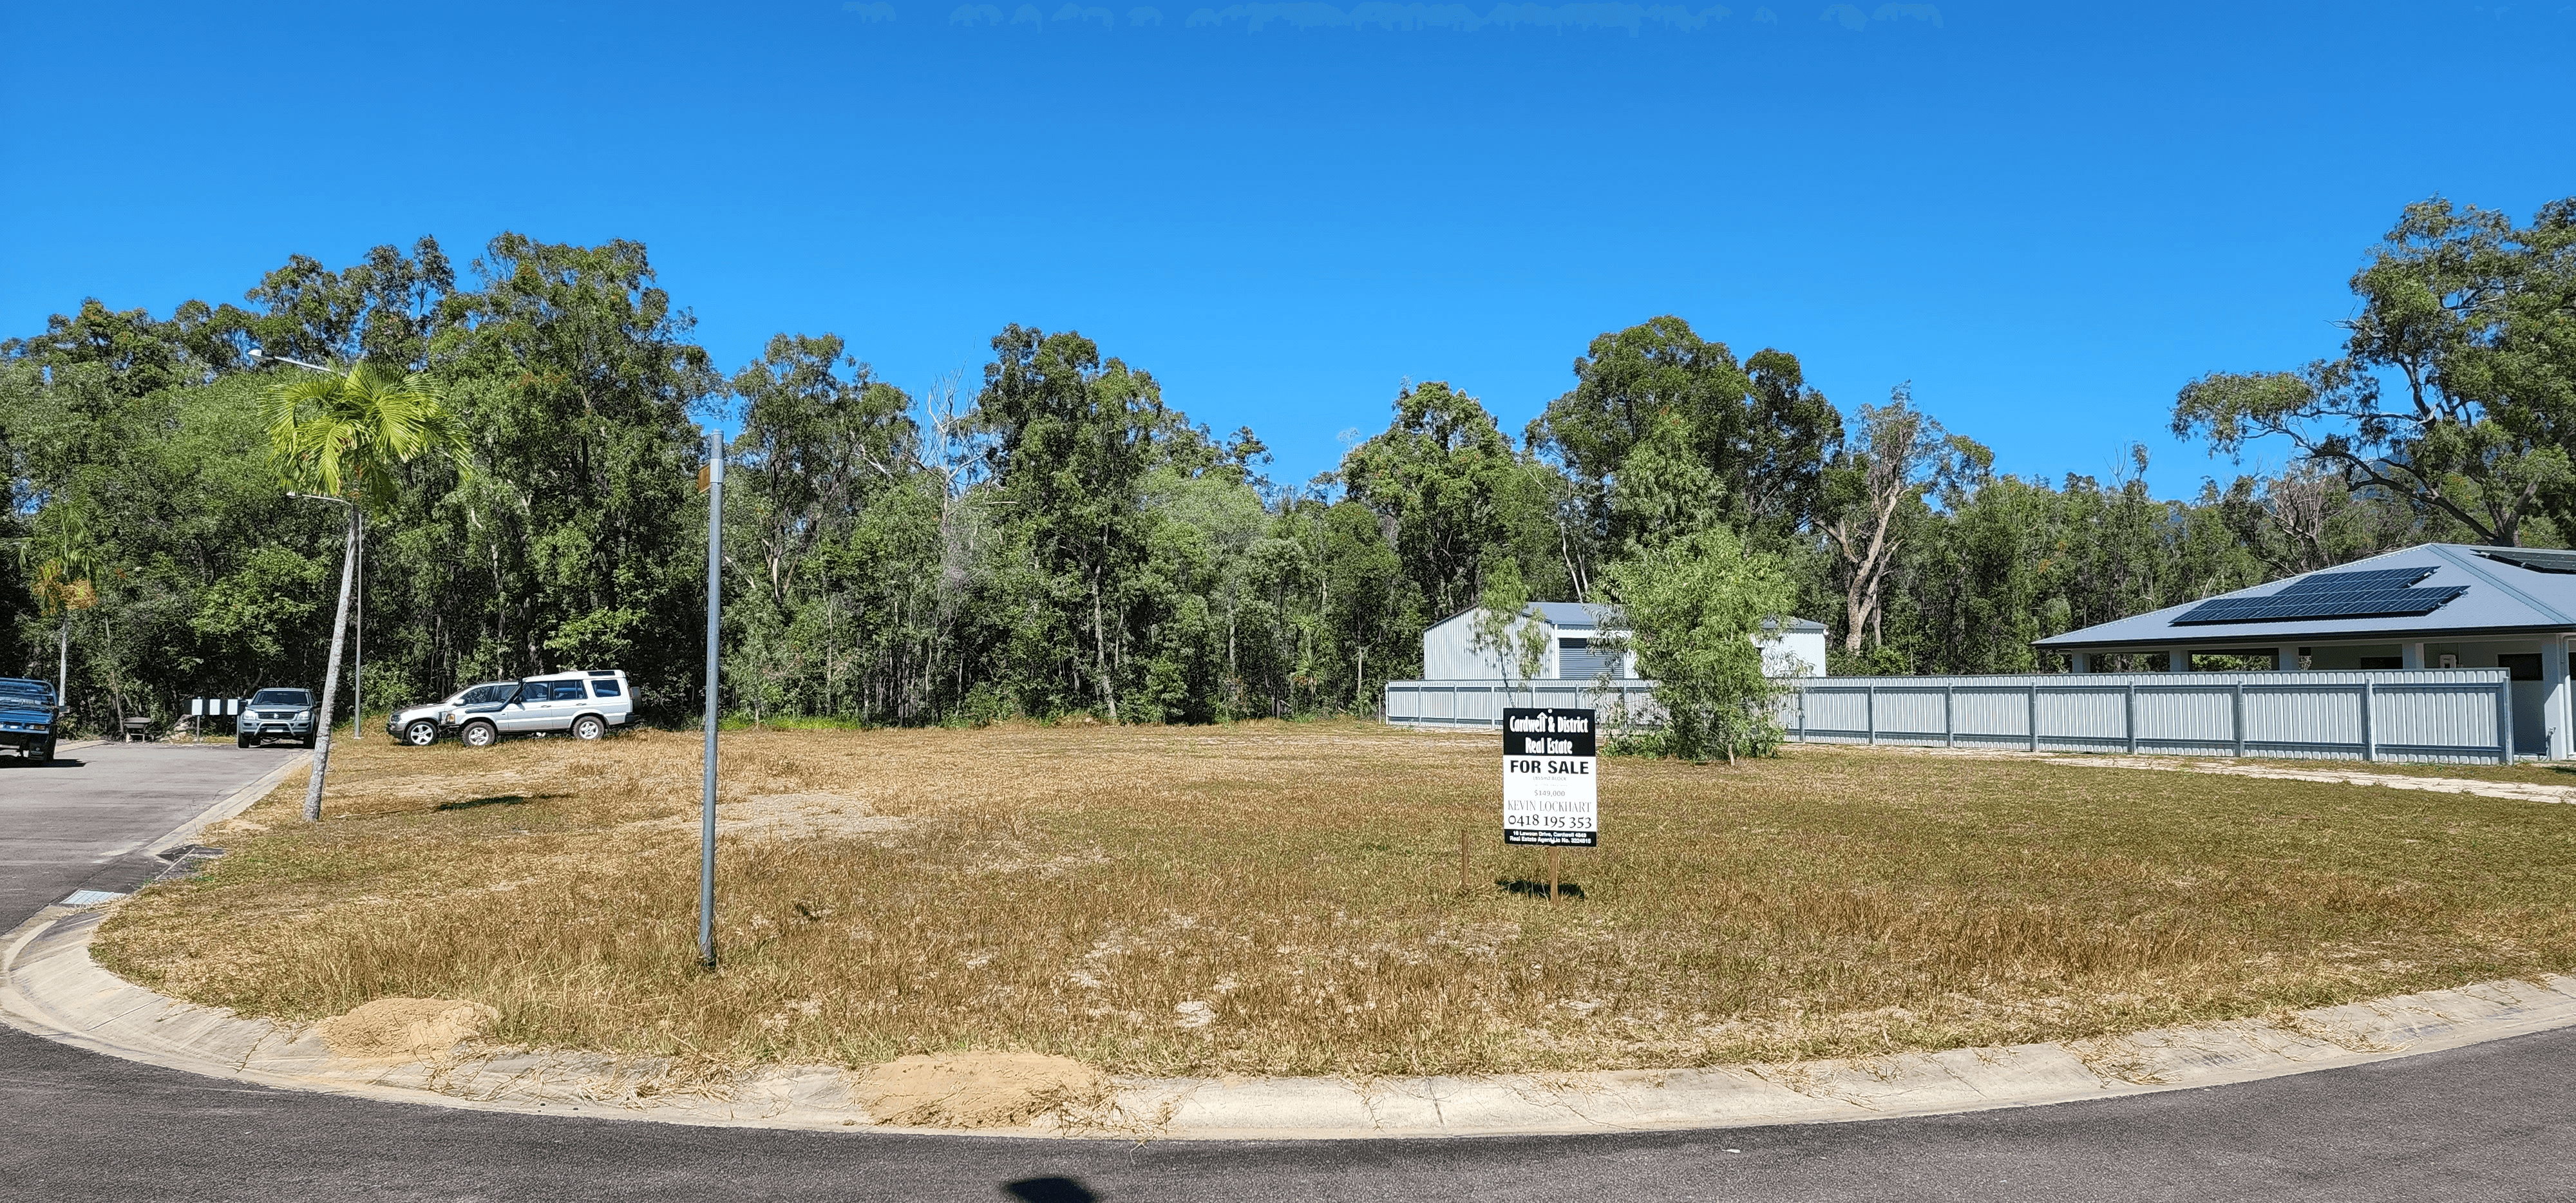 5 Phillips St, Cardwell, QLD 4849